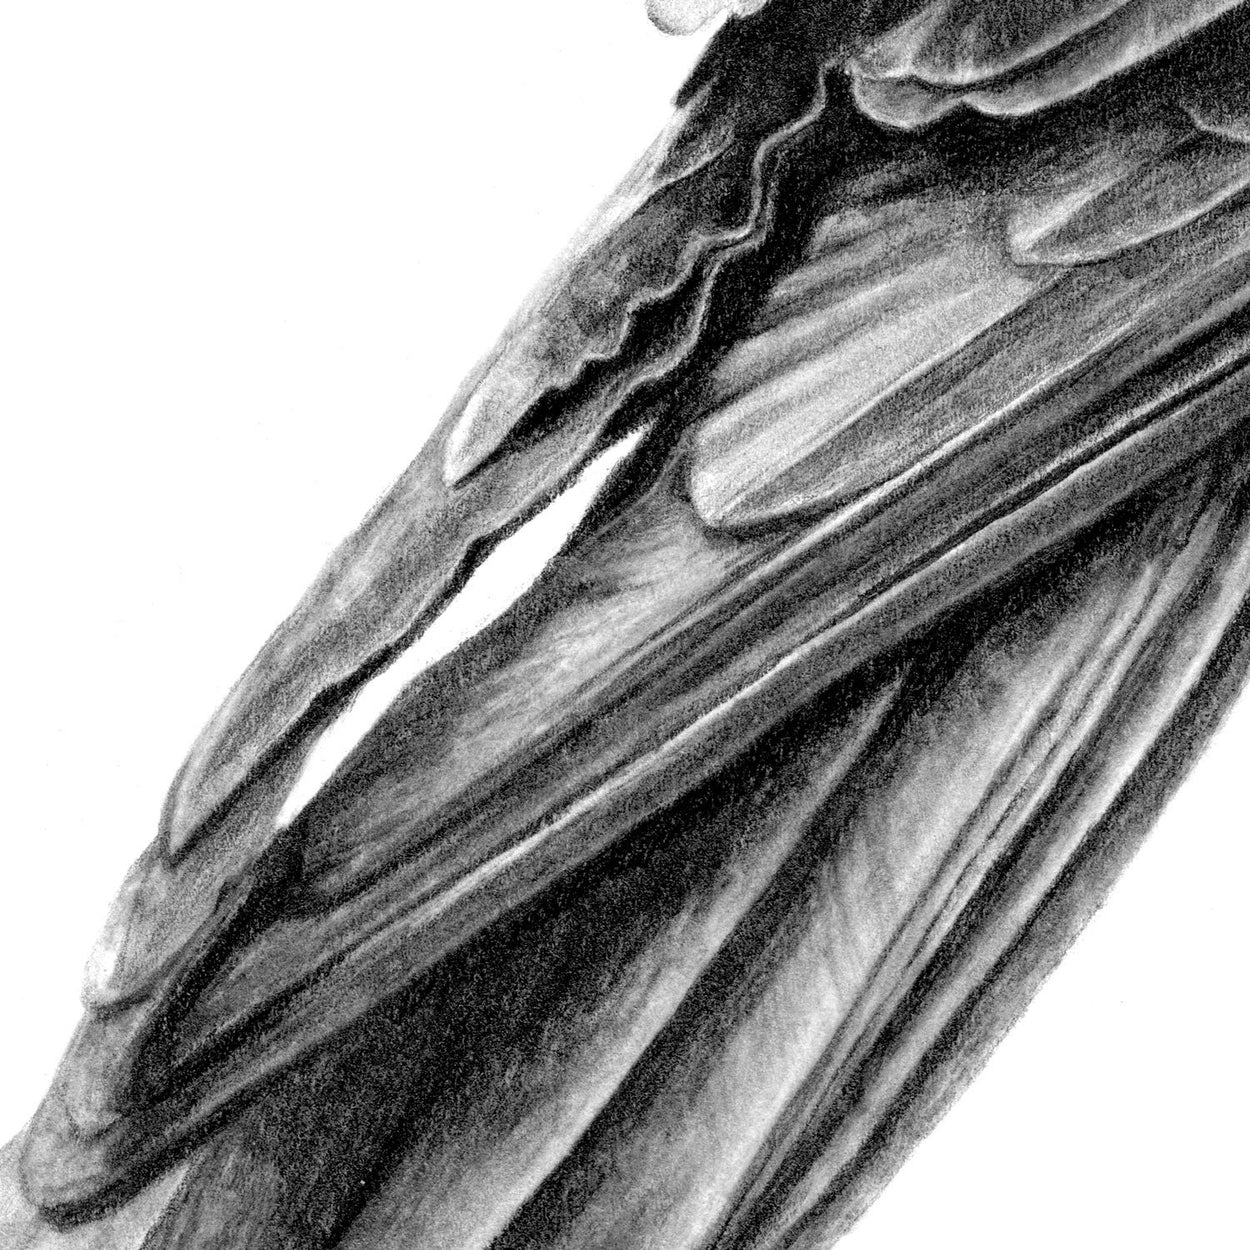 Crow Feathers Pencil Drawing Close-up - The Thriving Wild